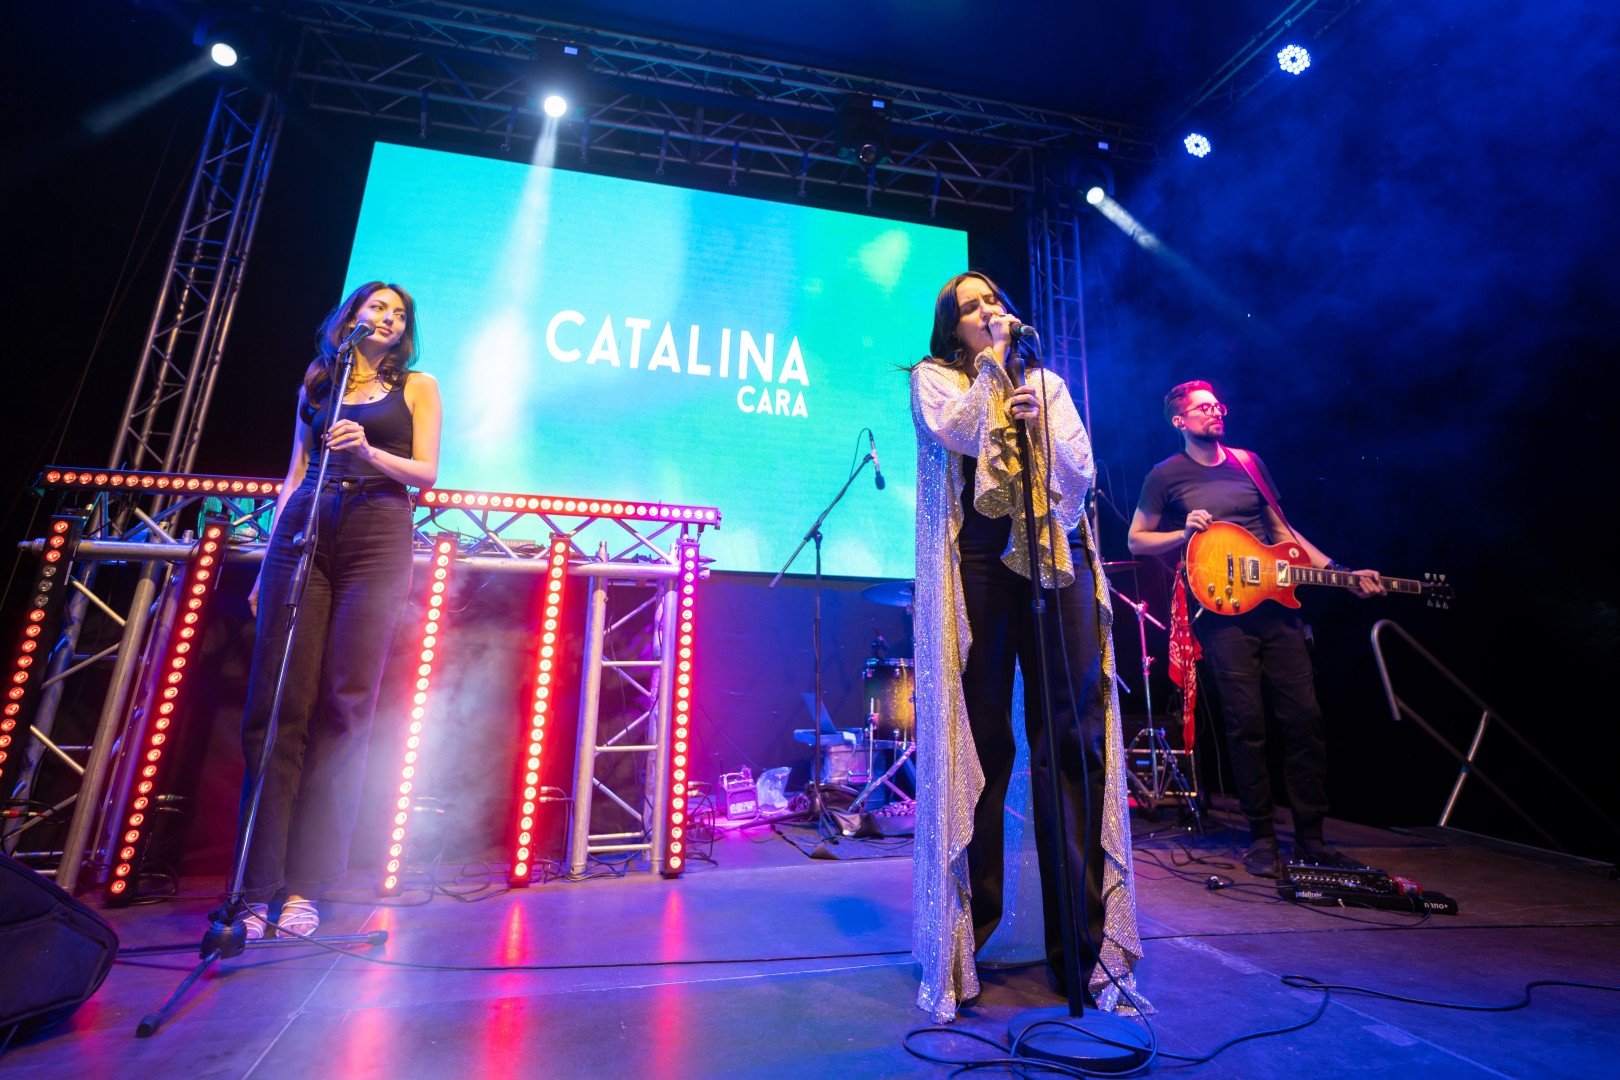 Catalina Cara at Clubul Diplomatic in Bucharest on September 15, 2022 (7fb9536f0f)